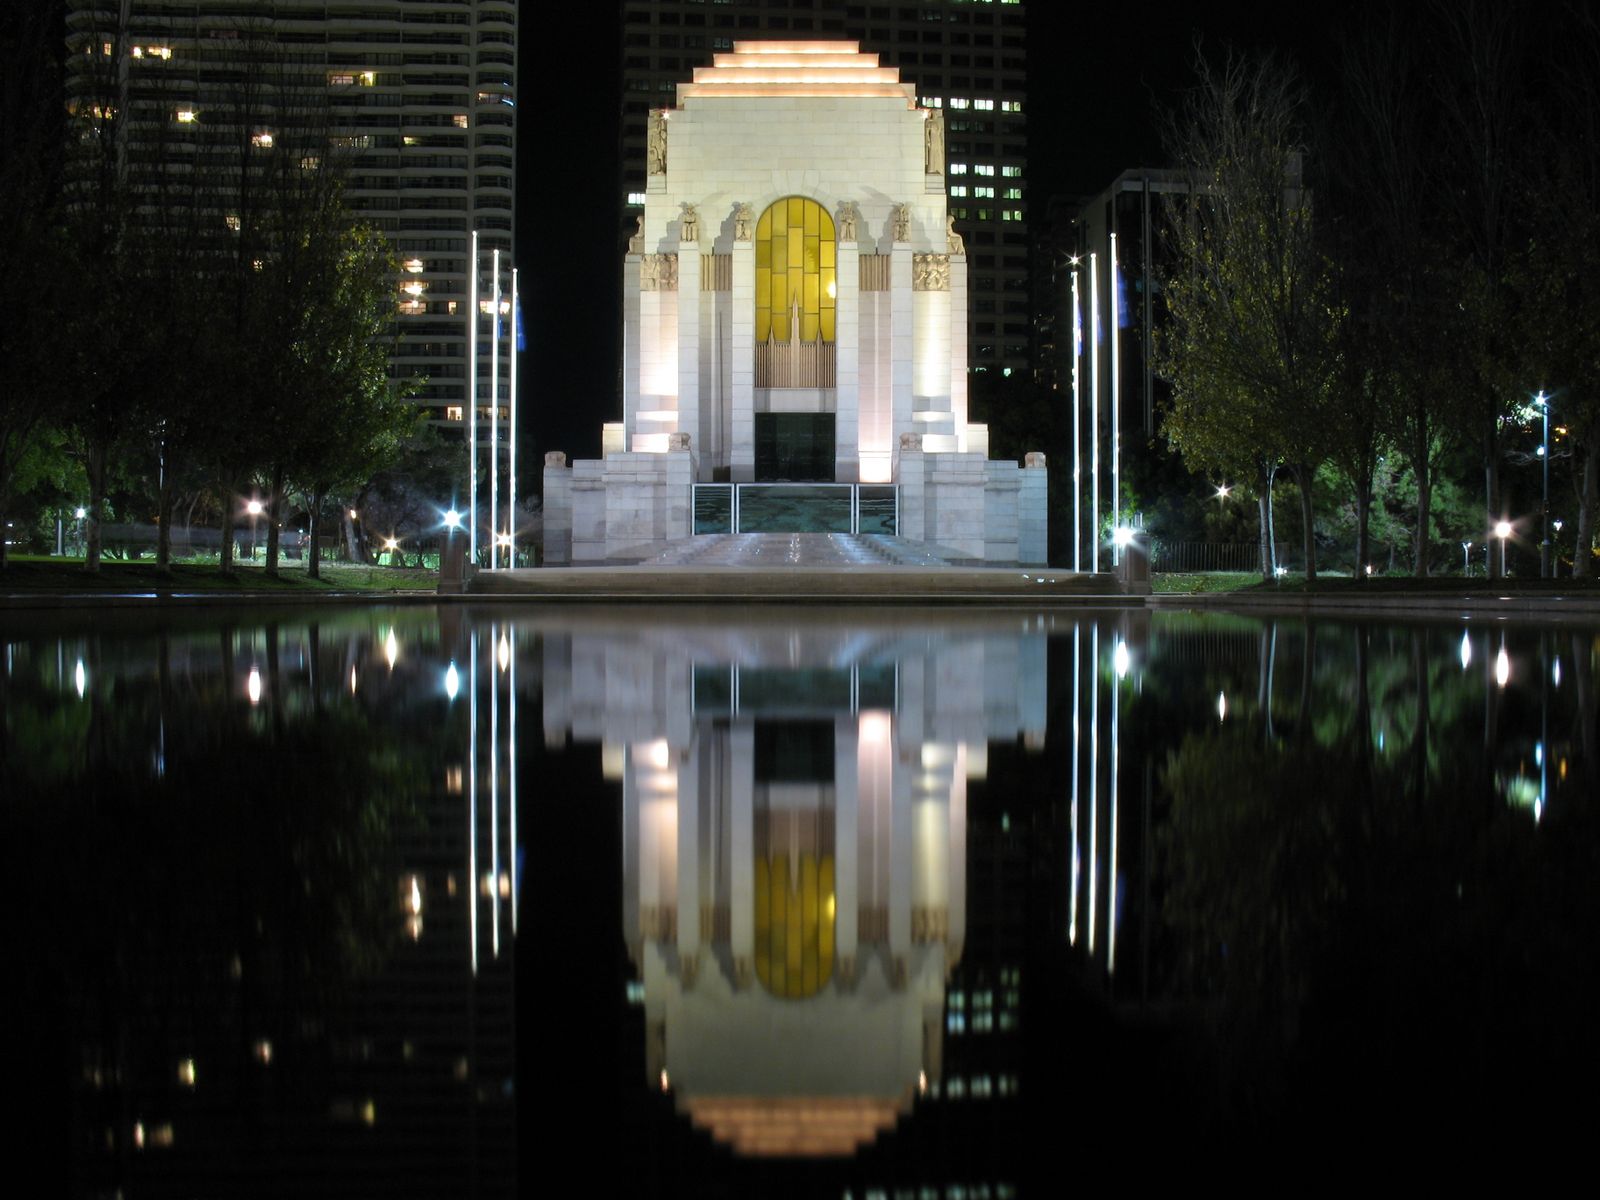 The ANZAC War Memorial in Sydney at night. It's white building that sits in front of a lake and the building reflection appears in the water,